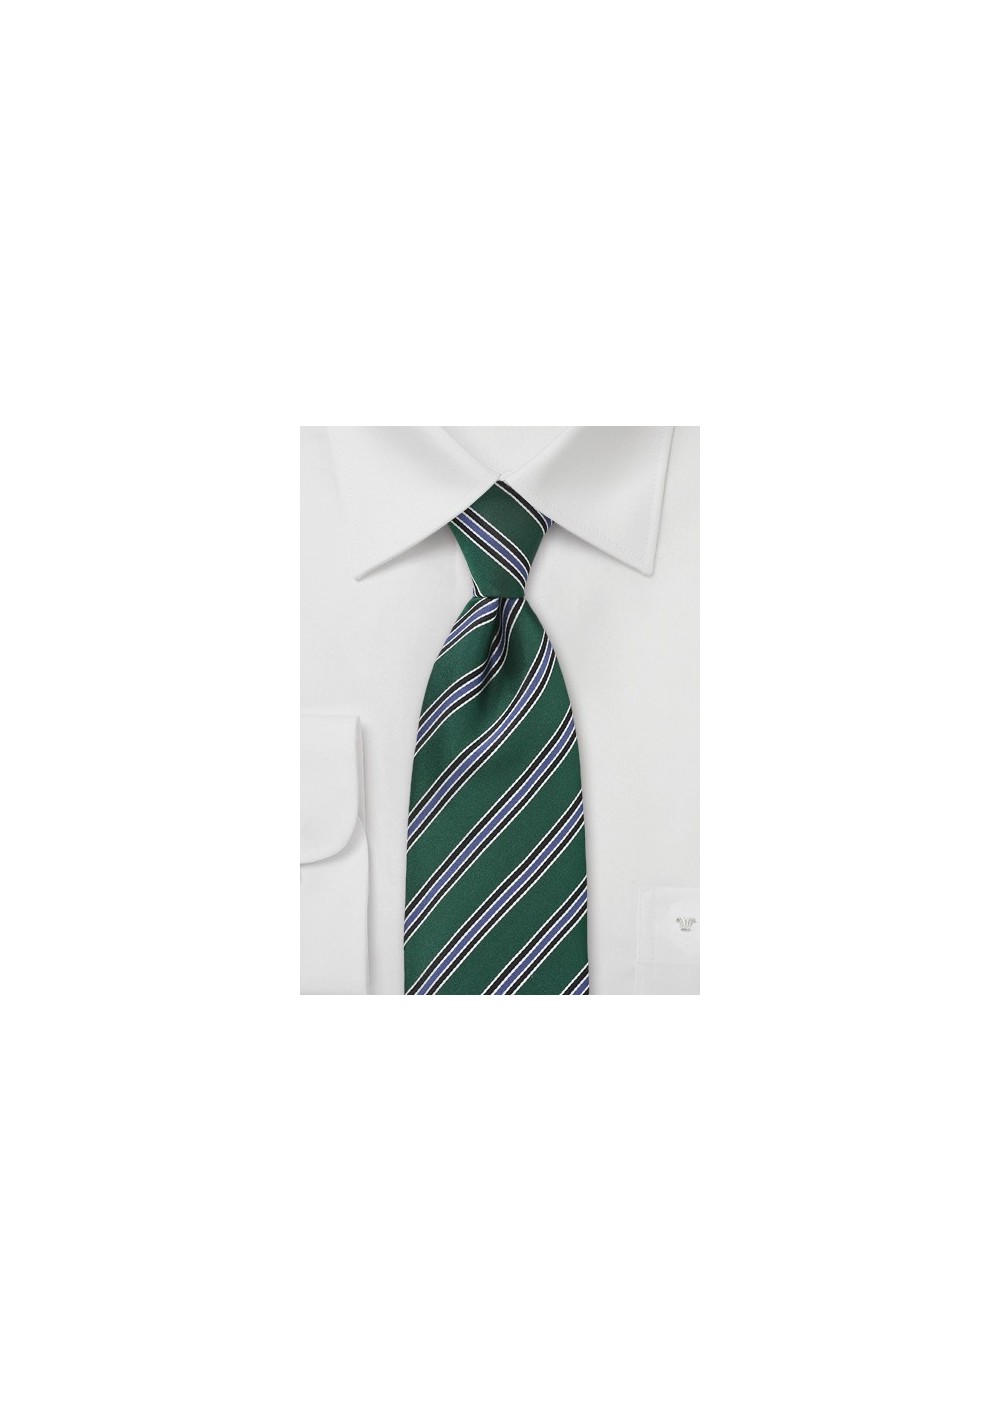 Striped Tie in Green, Black and Blue